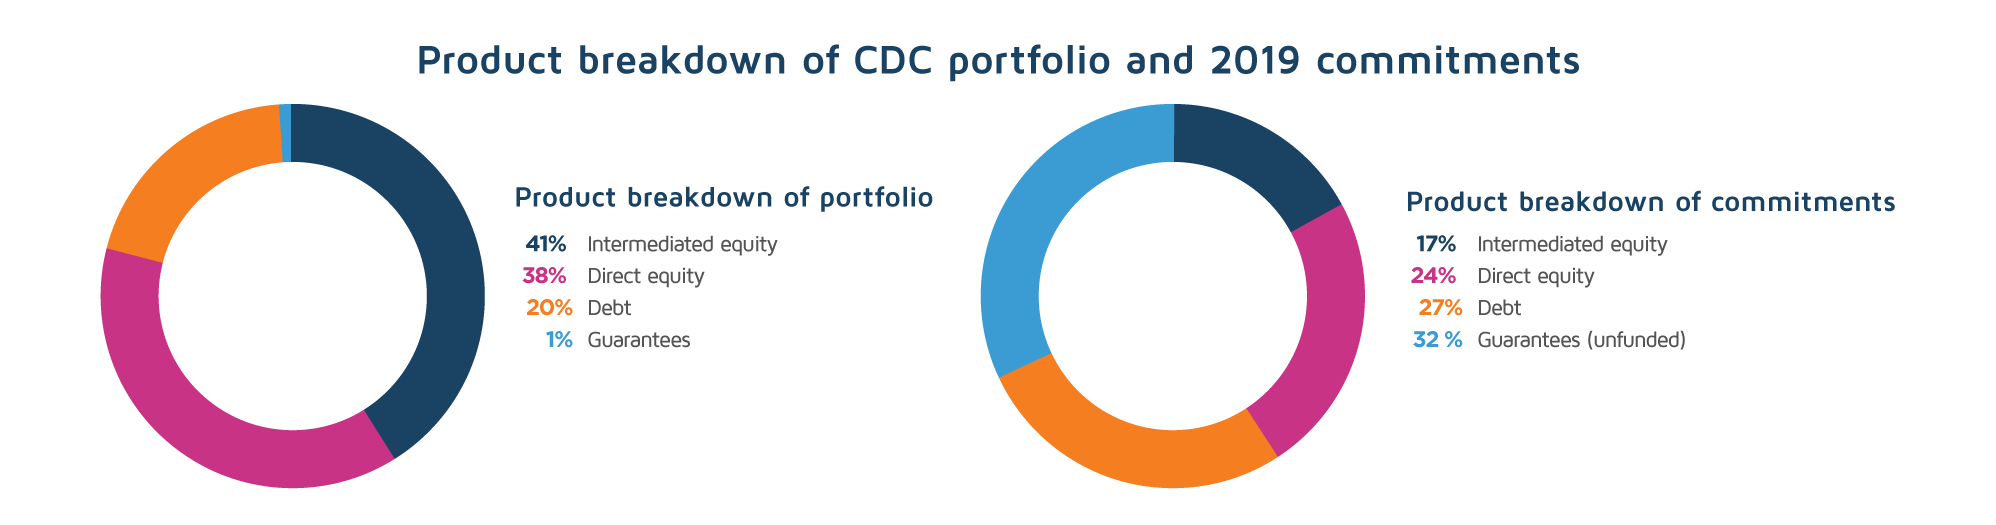 Product breakdown of CDC portfolio and 2019 commitments